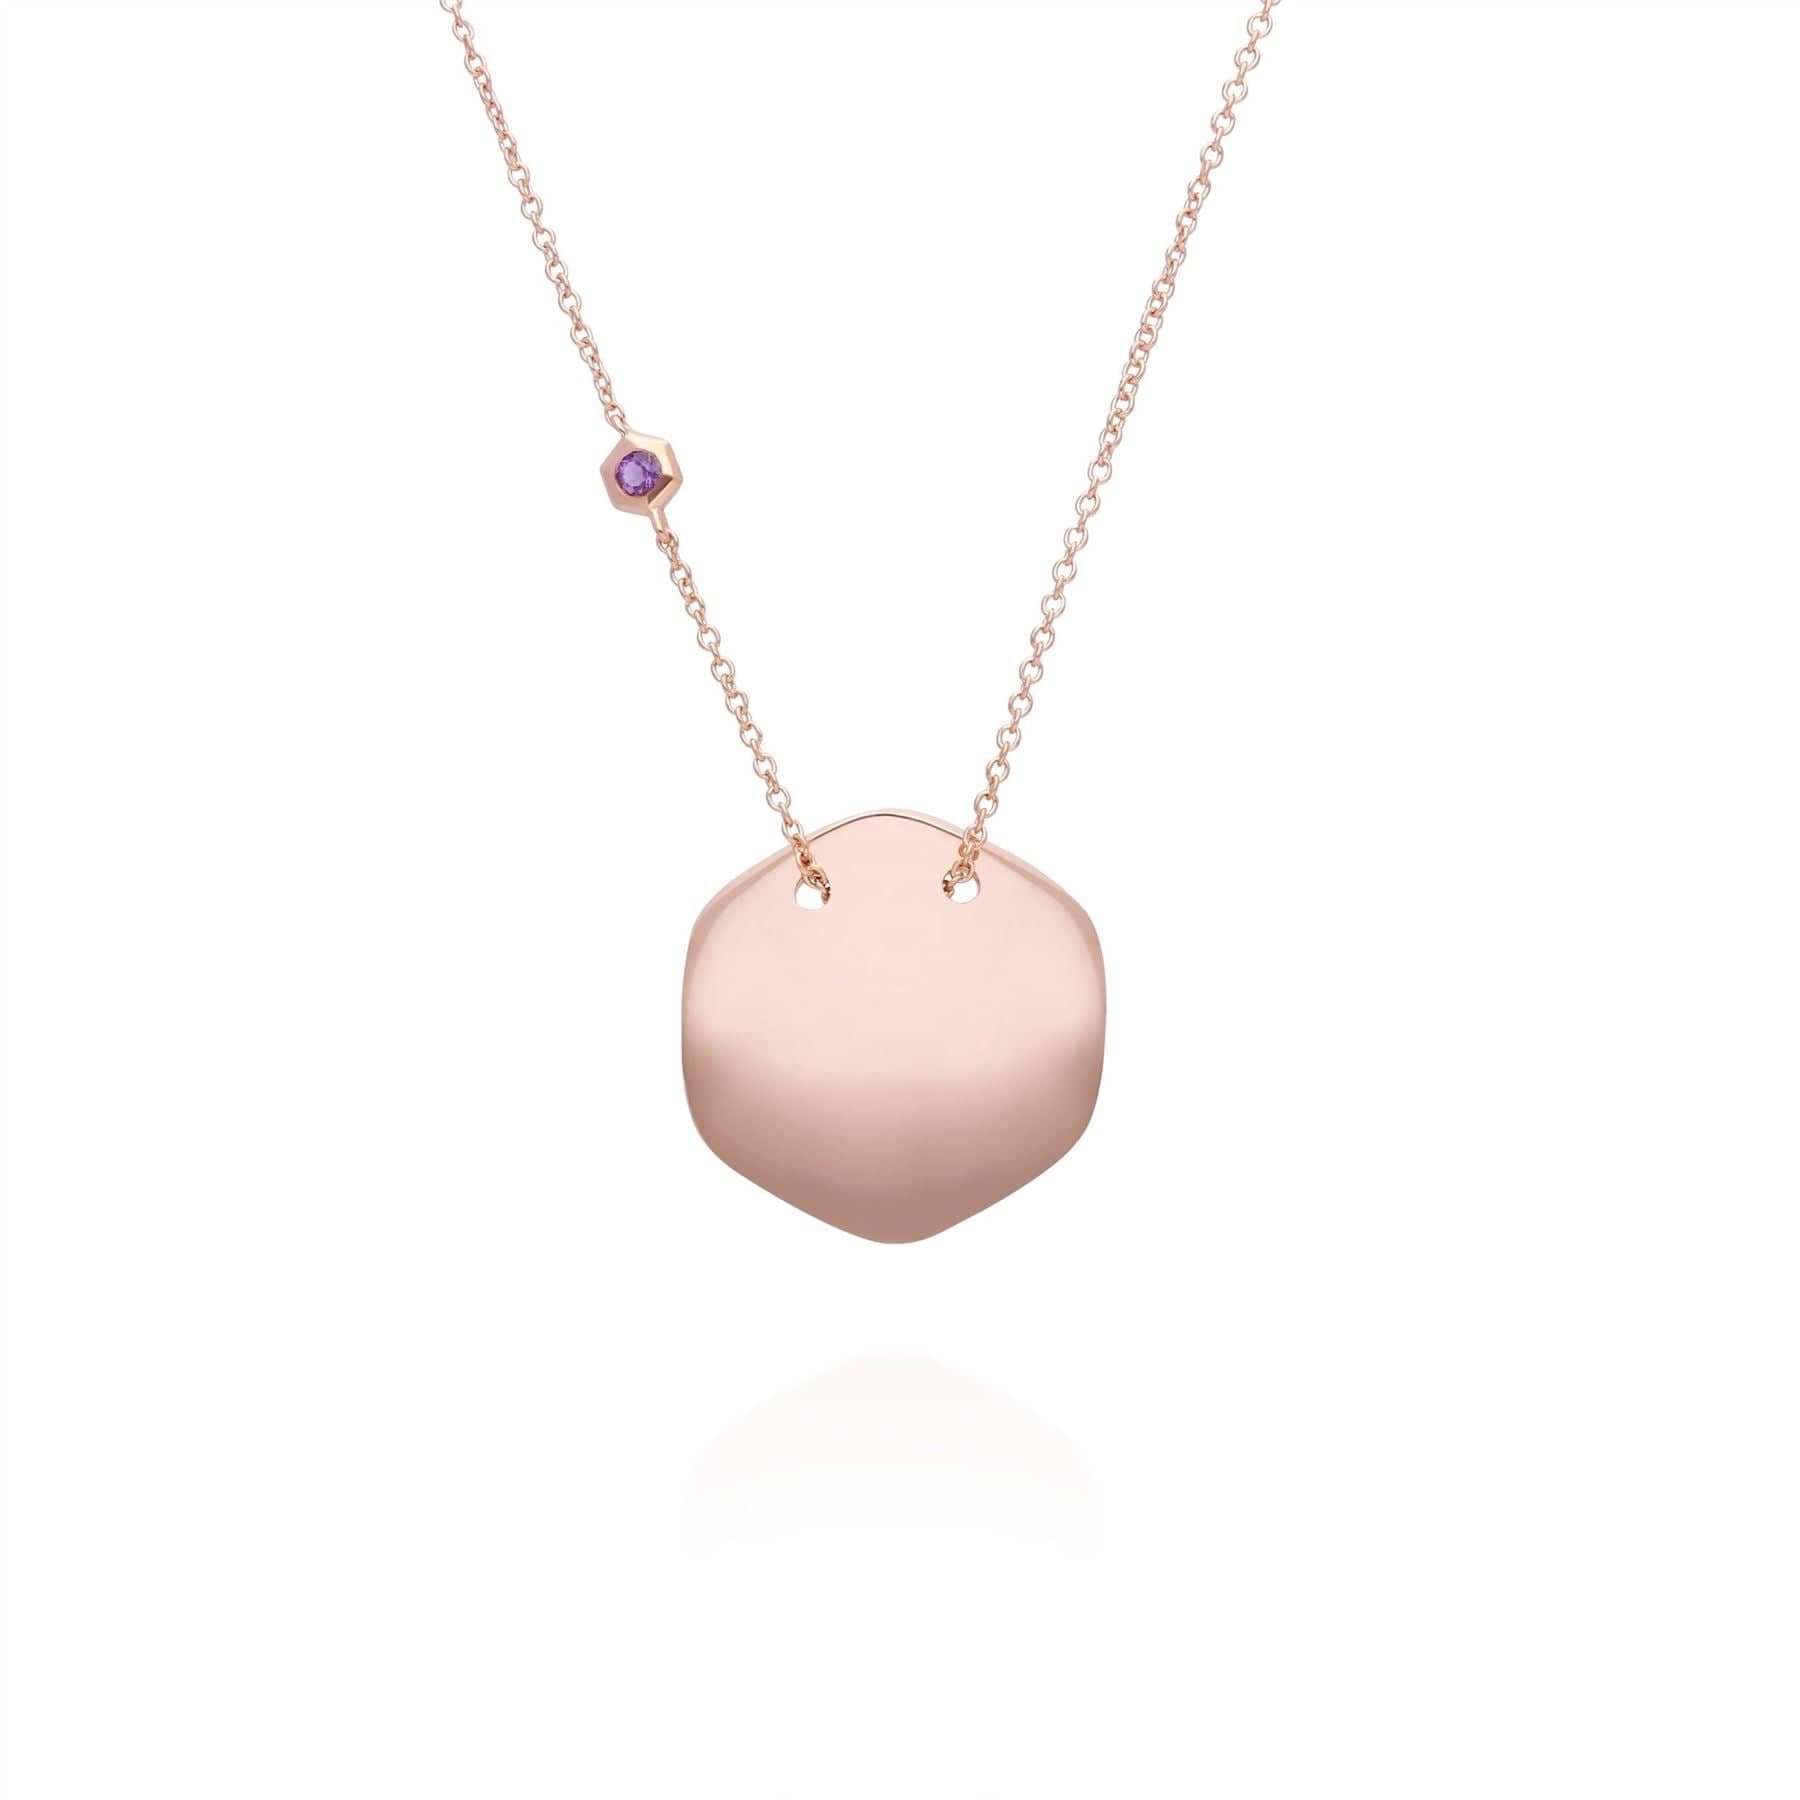 Amethyst Engravable Necklace in Rose Gold Plated Sterling Silver - Gemondo